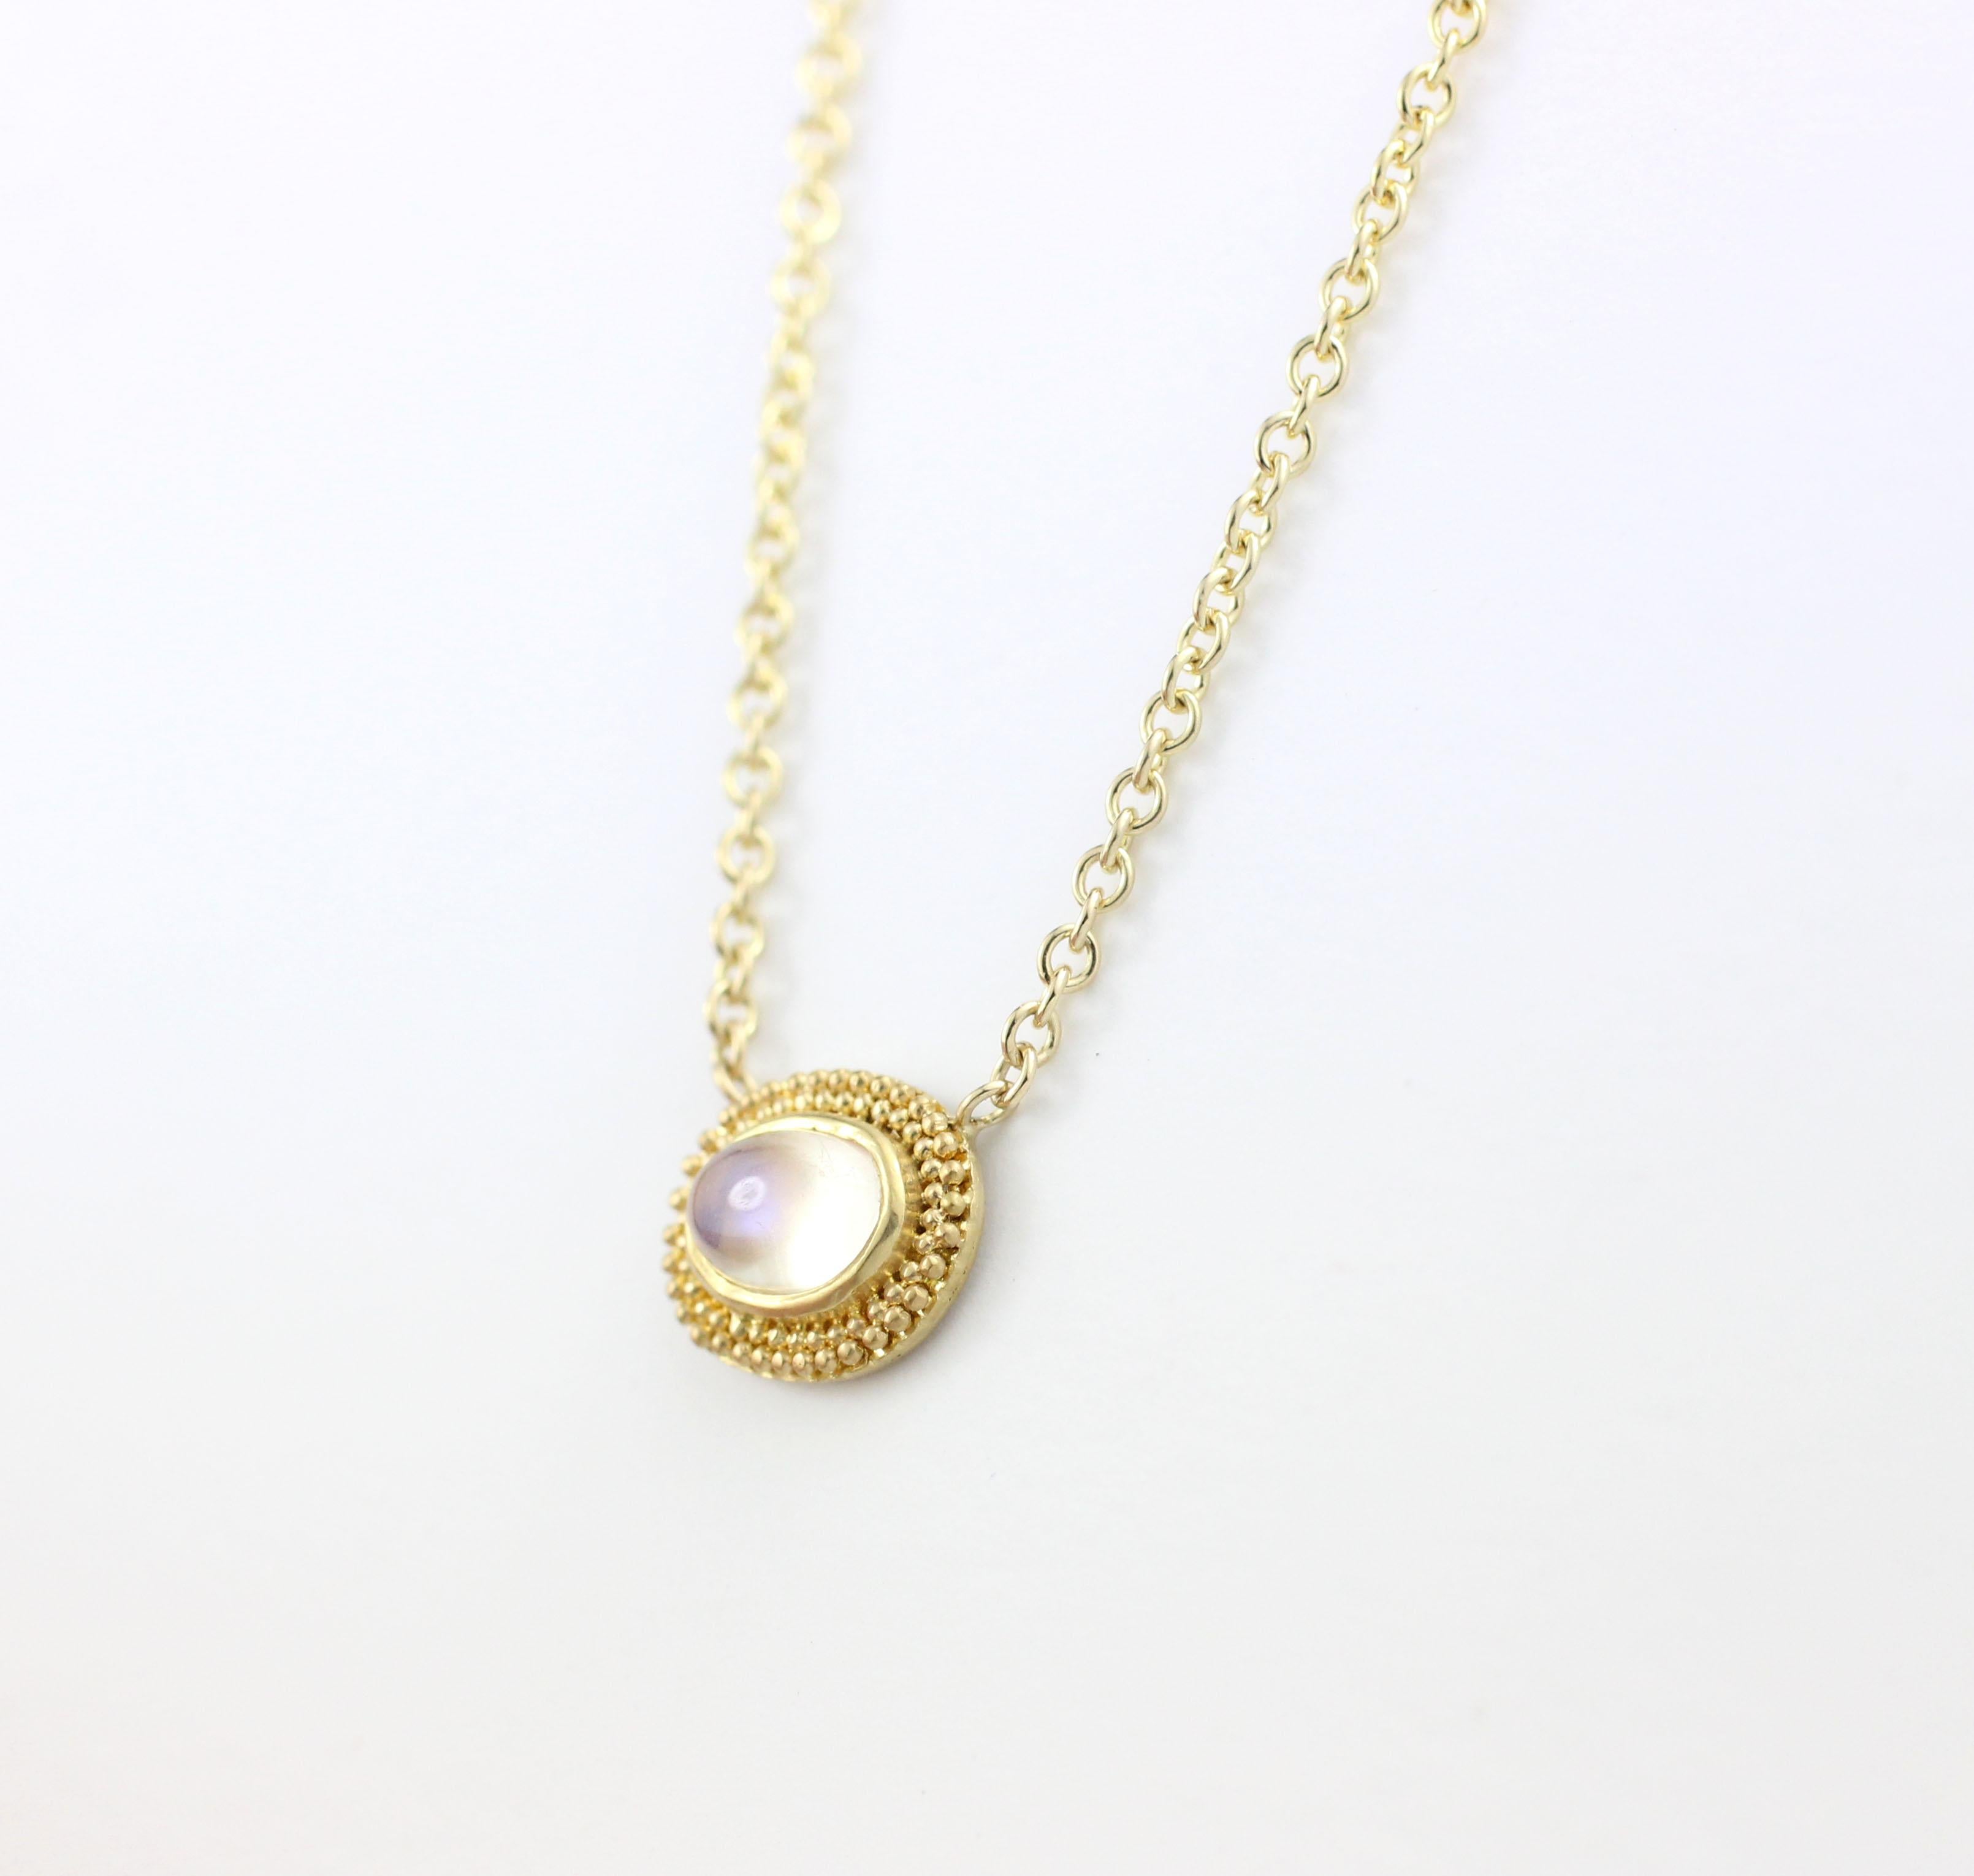 This hand granulated, 22 Kt Gold pendant is stationary on its 17” long, 18 Kt Gold Chain.  It contains One Cabochon Moonstone (.63 Cts.).  One of a Kind.

Designed and Made in-house by Julius Cohen New York.